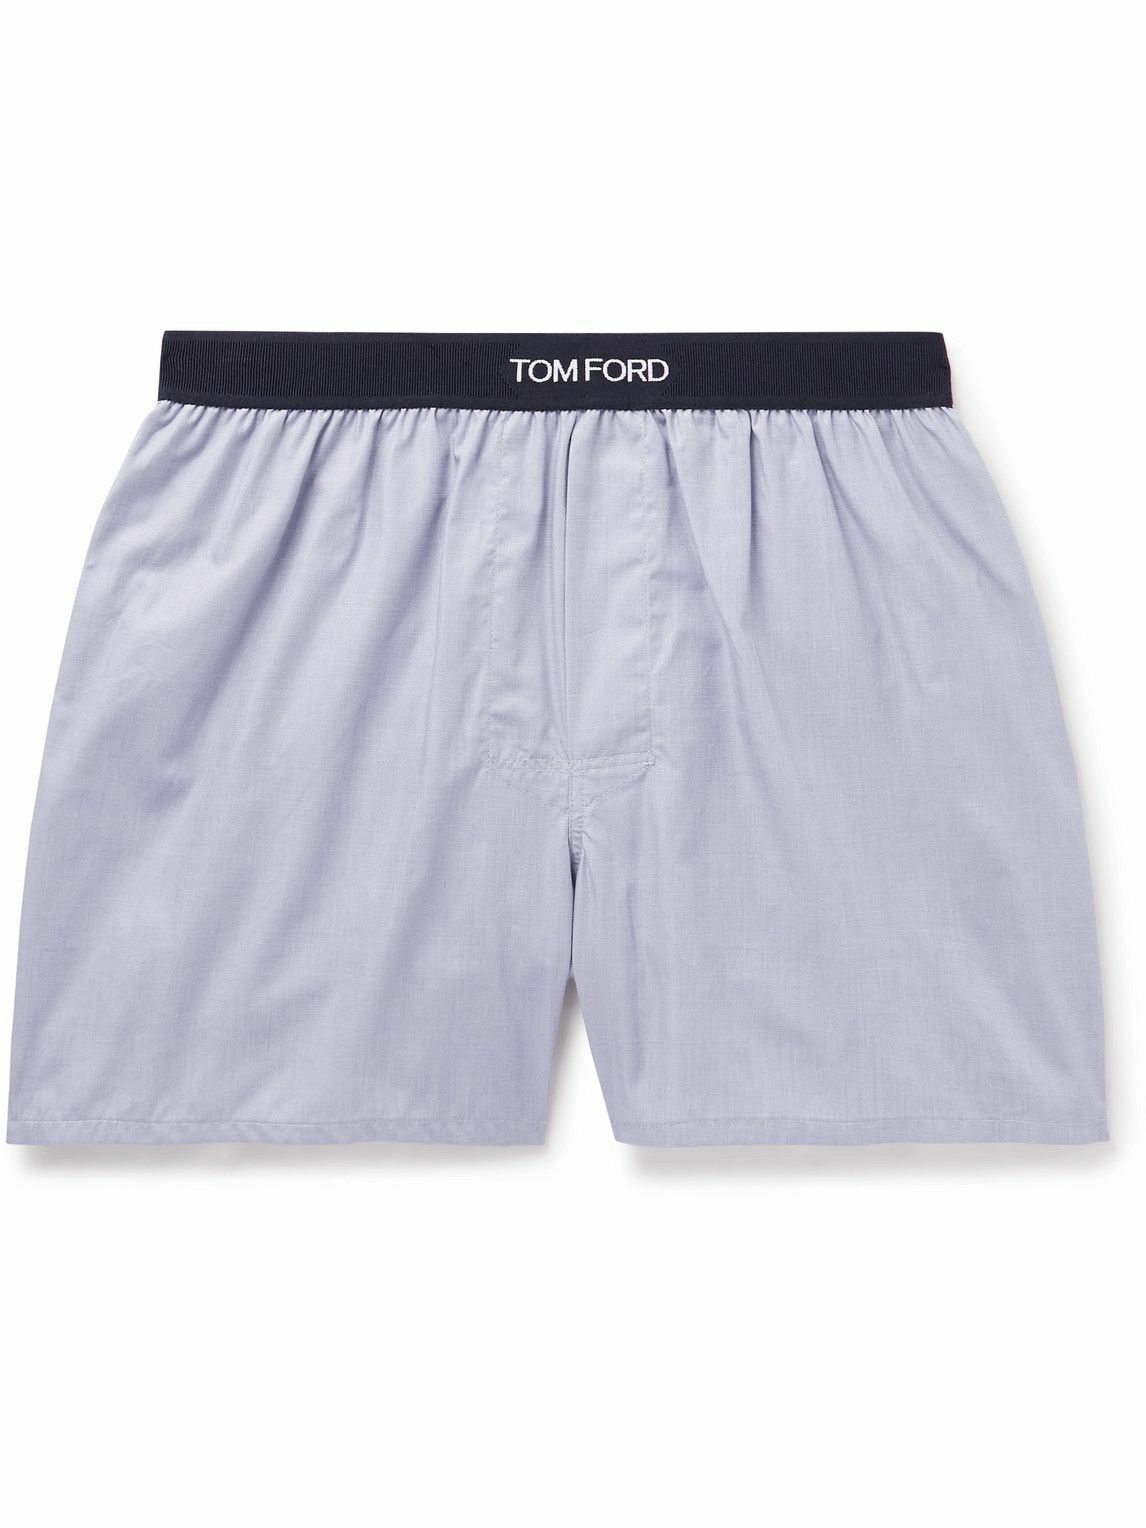 TOM FORD - Cotton Boxer Shorts - Gray TOM FORD